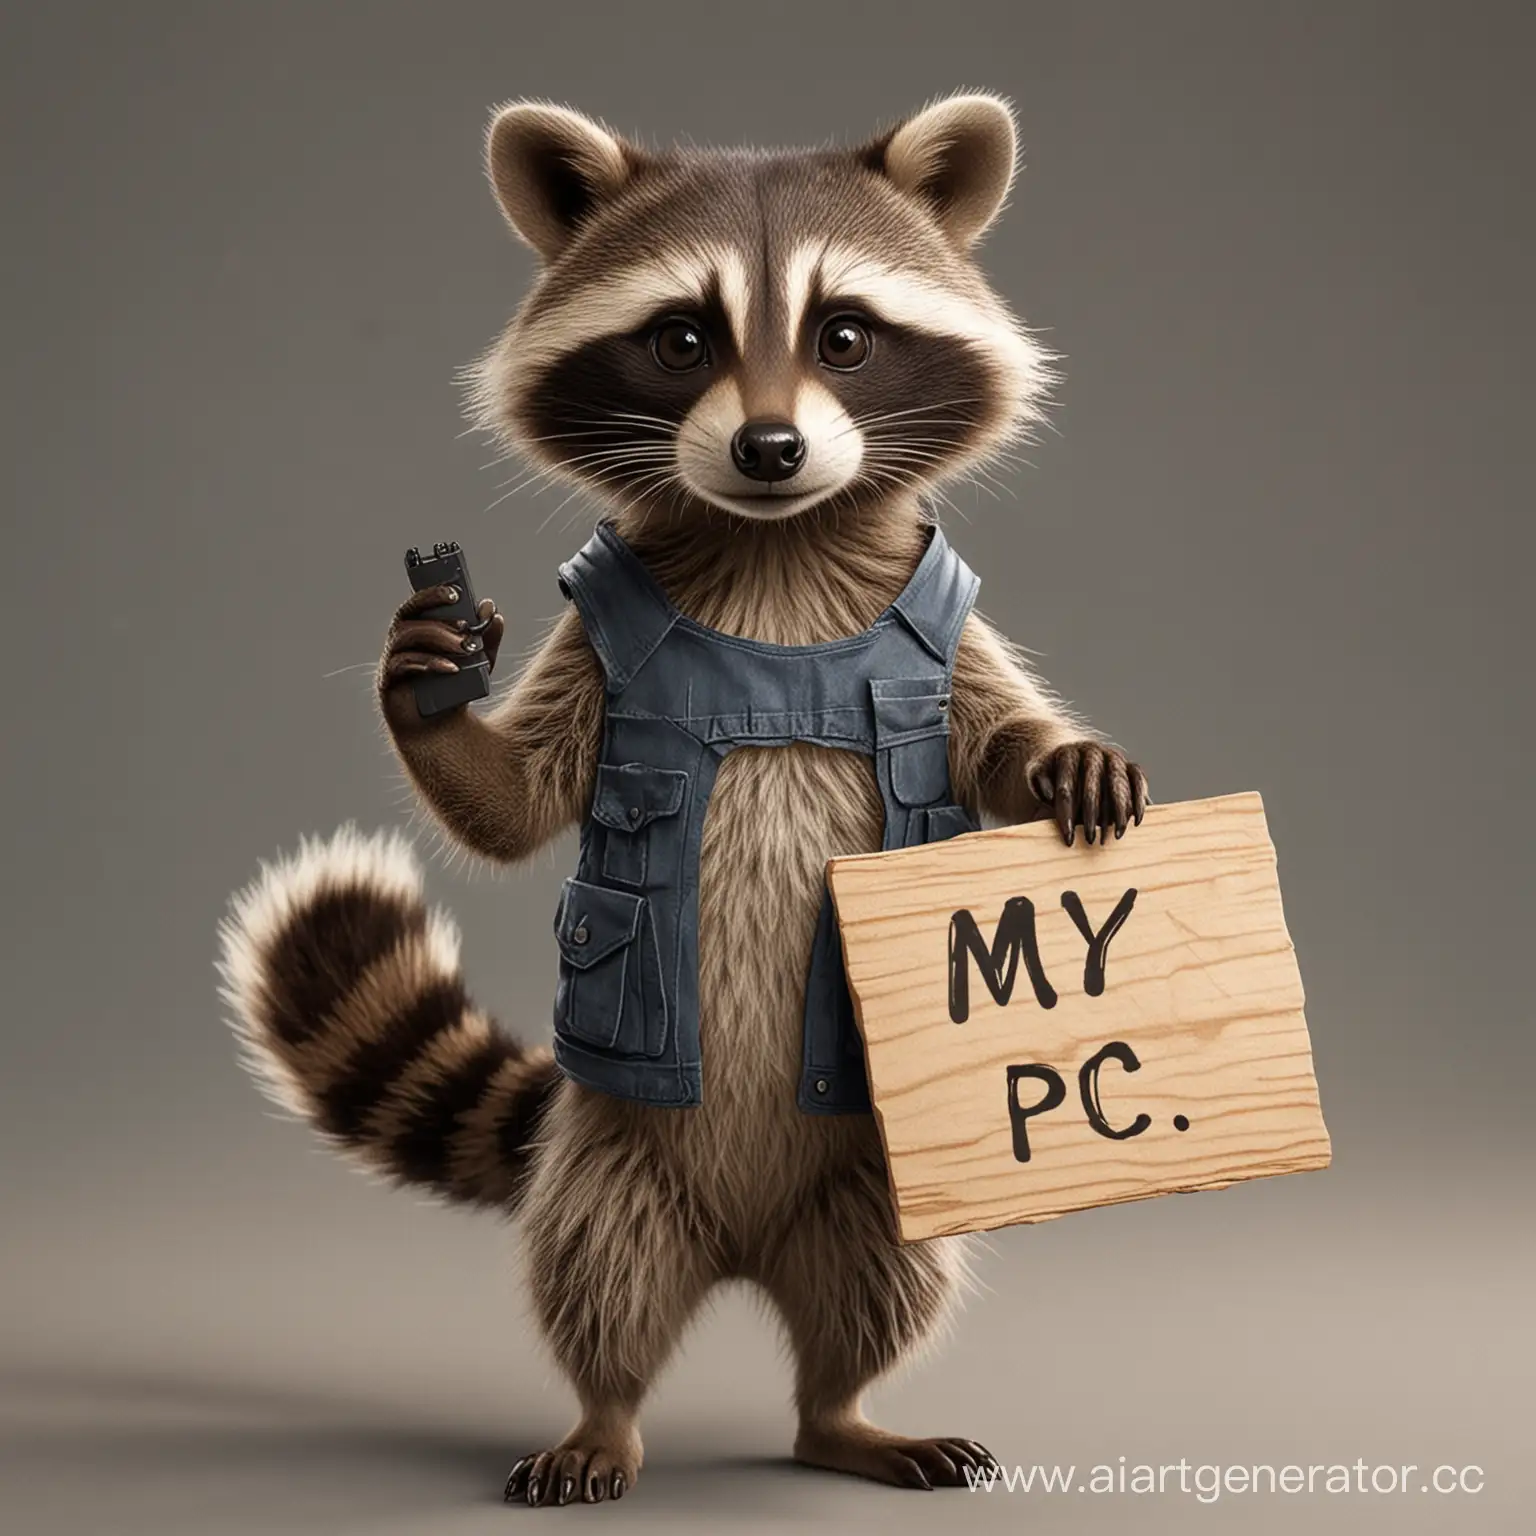 a raccoon with a sign in his hands that says "my PC"